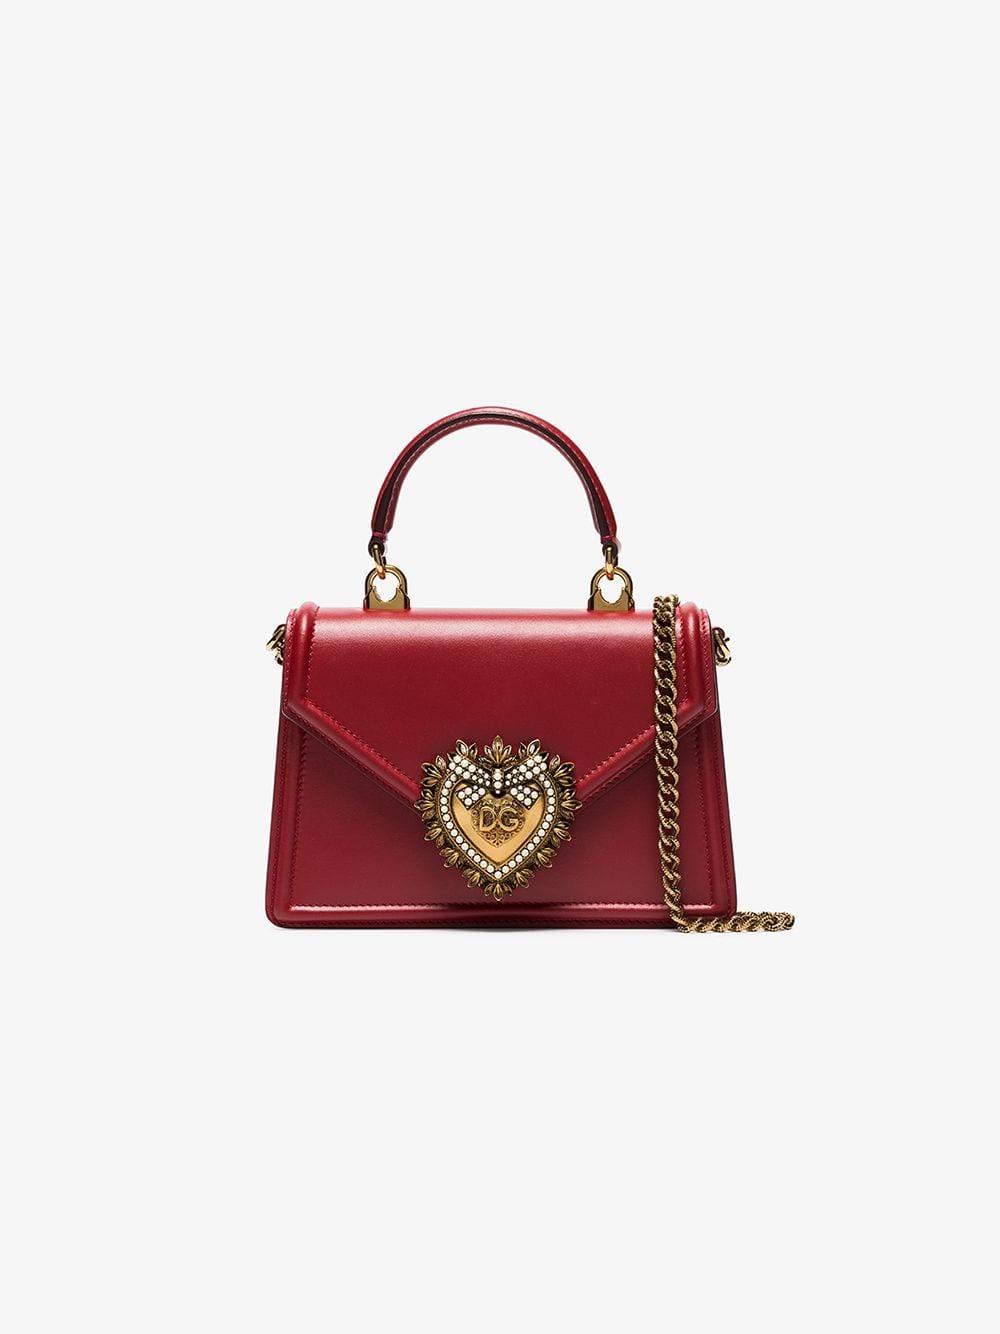 Dolce & Gabbana Leather Medium Devotion Bag in Red - Save 16% | Lyst